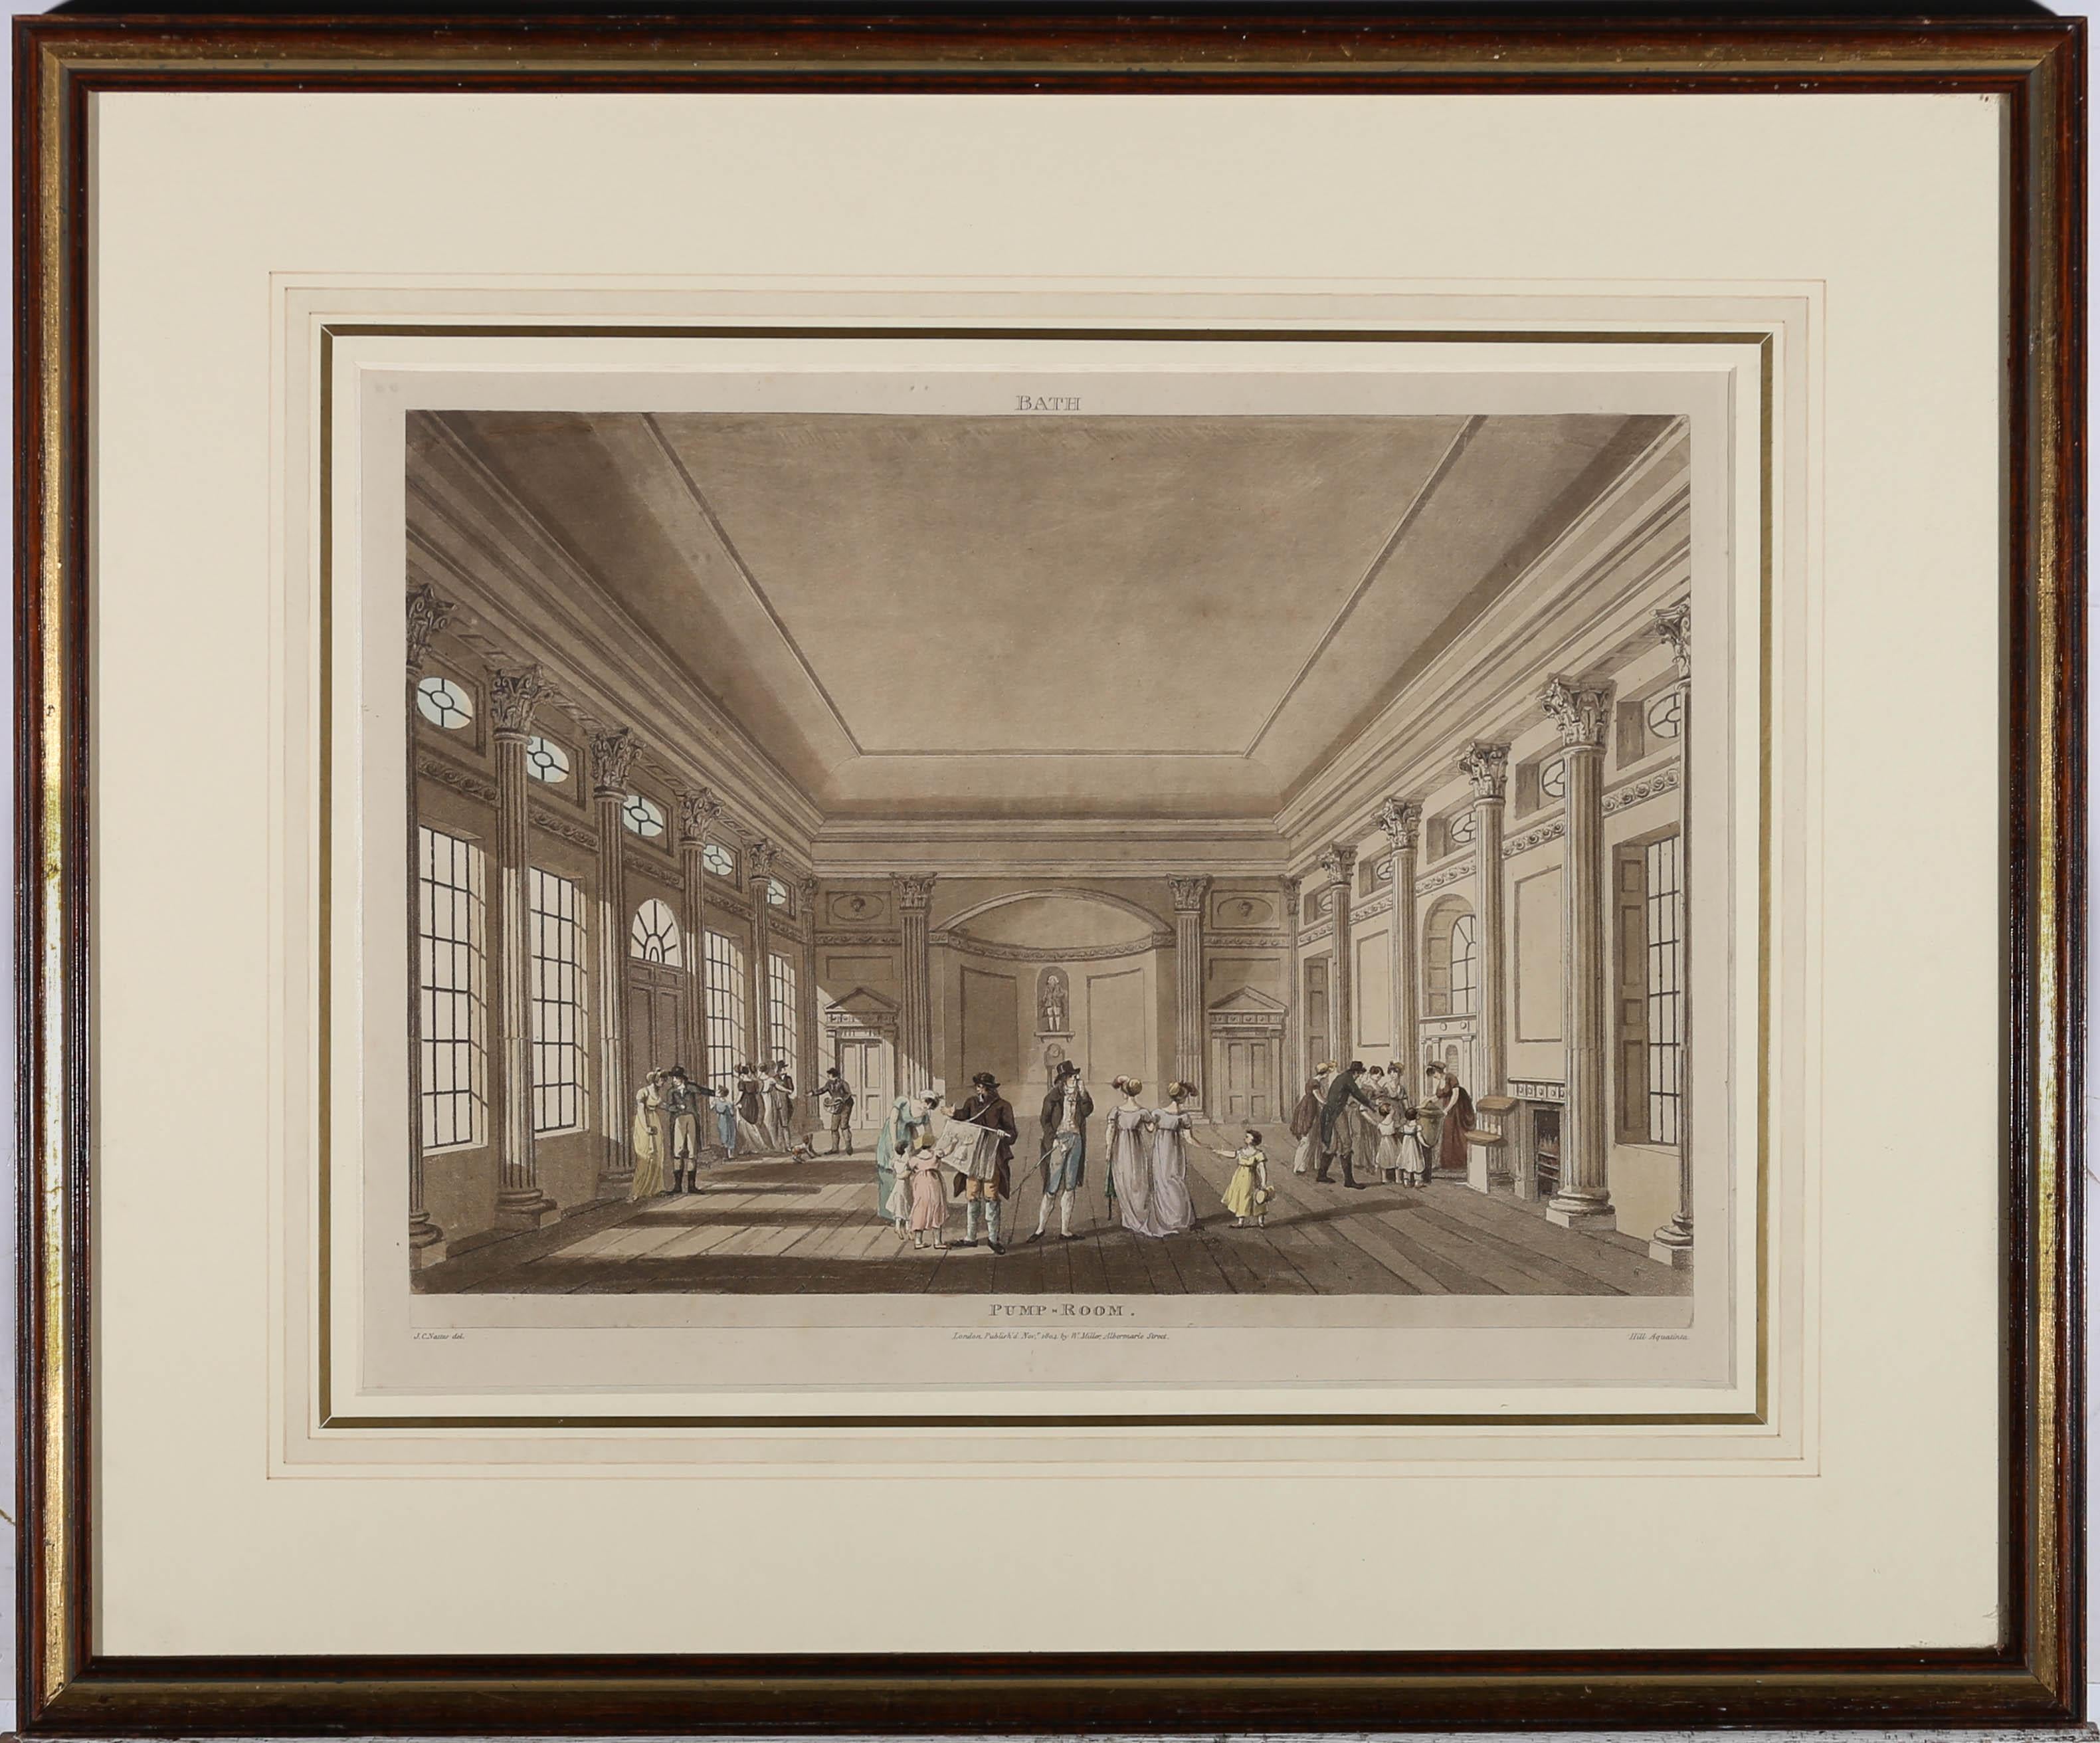 A fine aquatint with hand colouring depicting the Pump Room, Bath by John Hill after John Claude Nattes (c.1765-1839). Published in 1804 by W. Miller. Presented in a wash line mount with gilt window border, and glazed wooden frame with gilt accent.